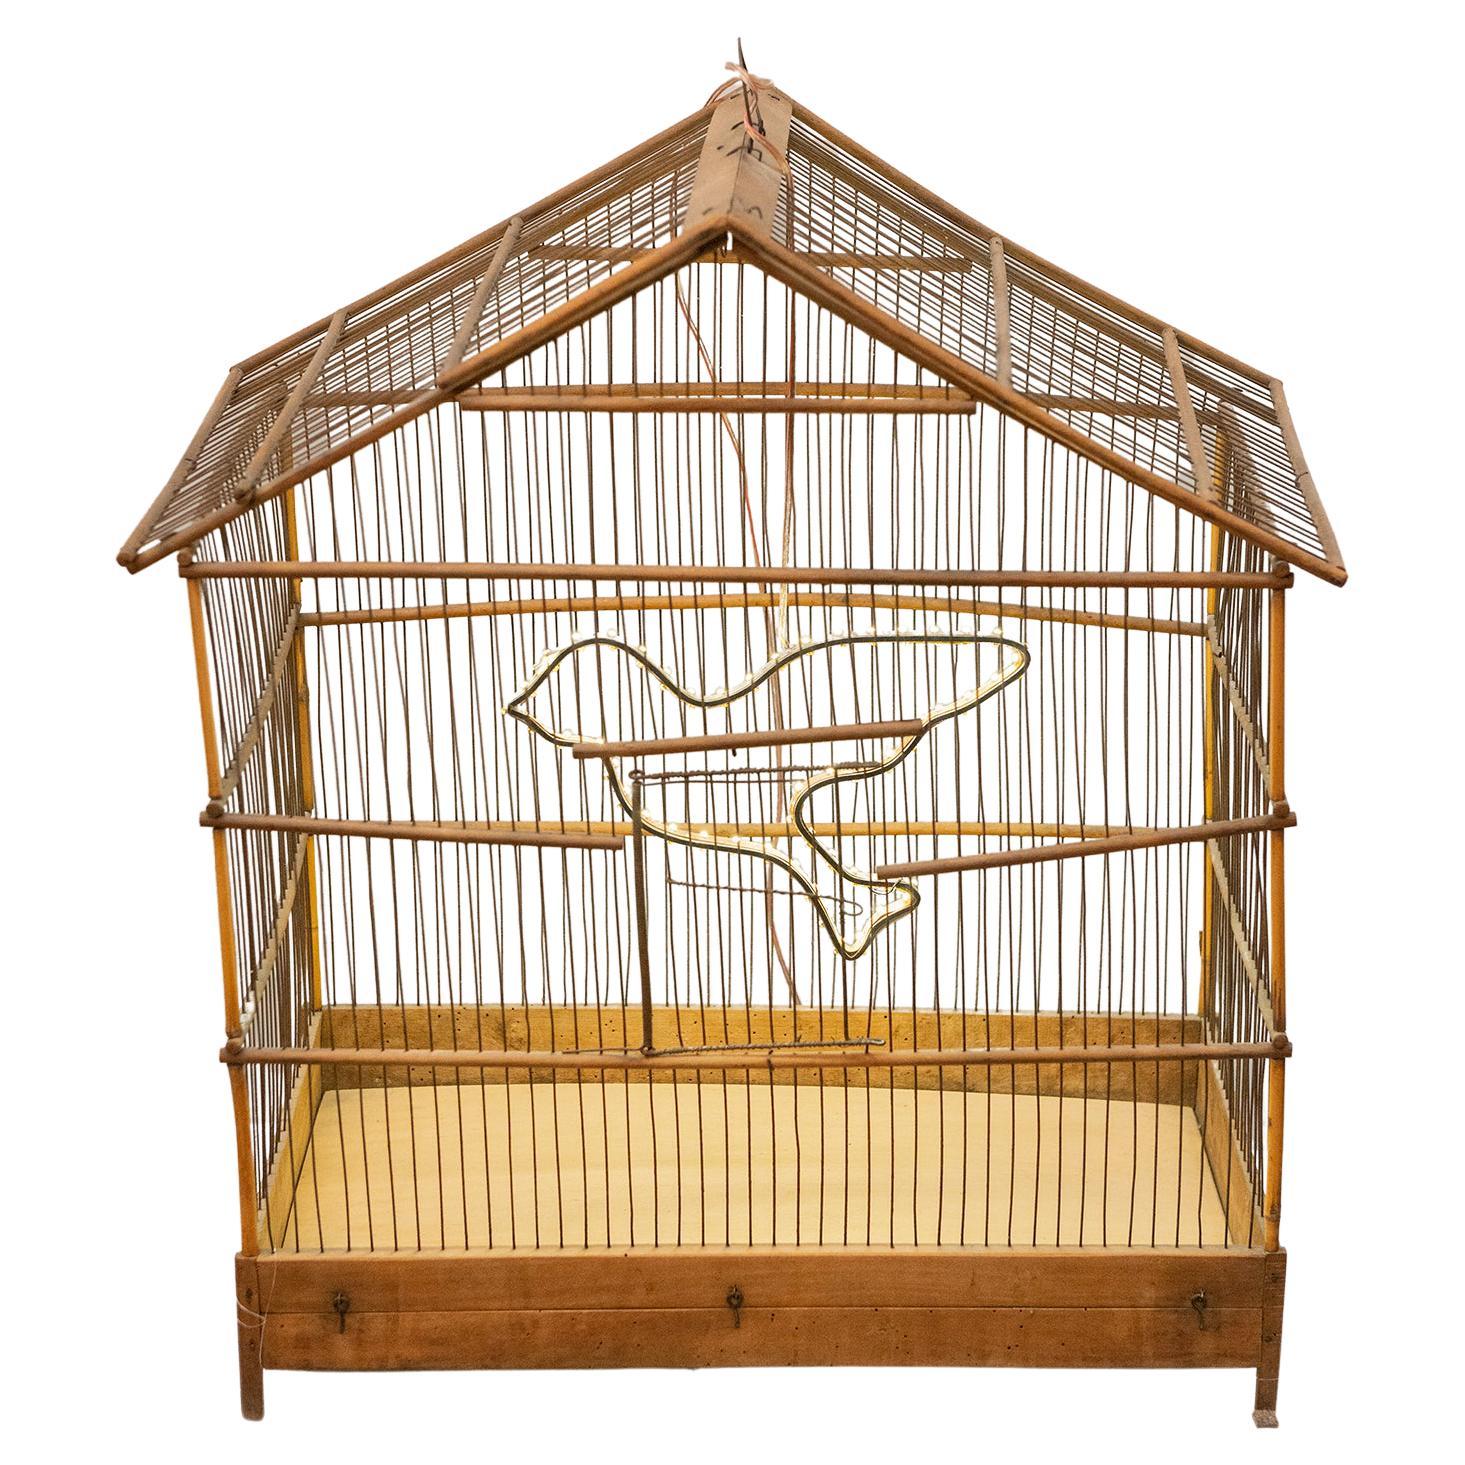 Old Bird Cage with a Bright Little Bird